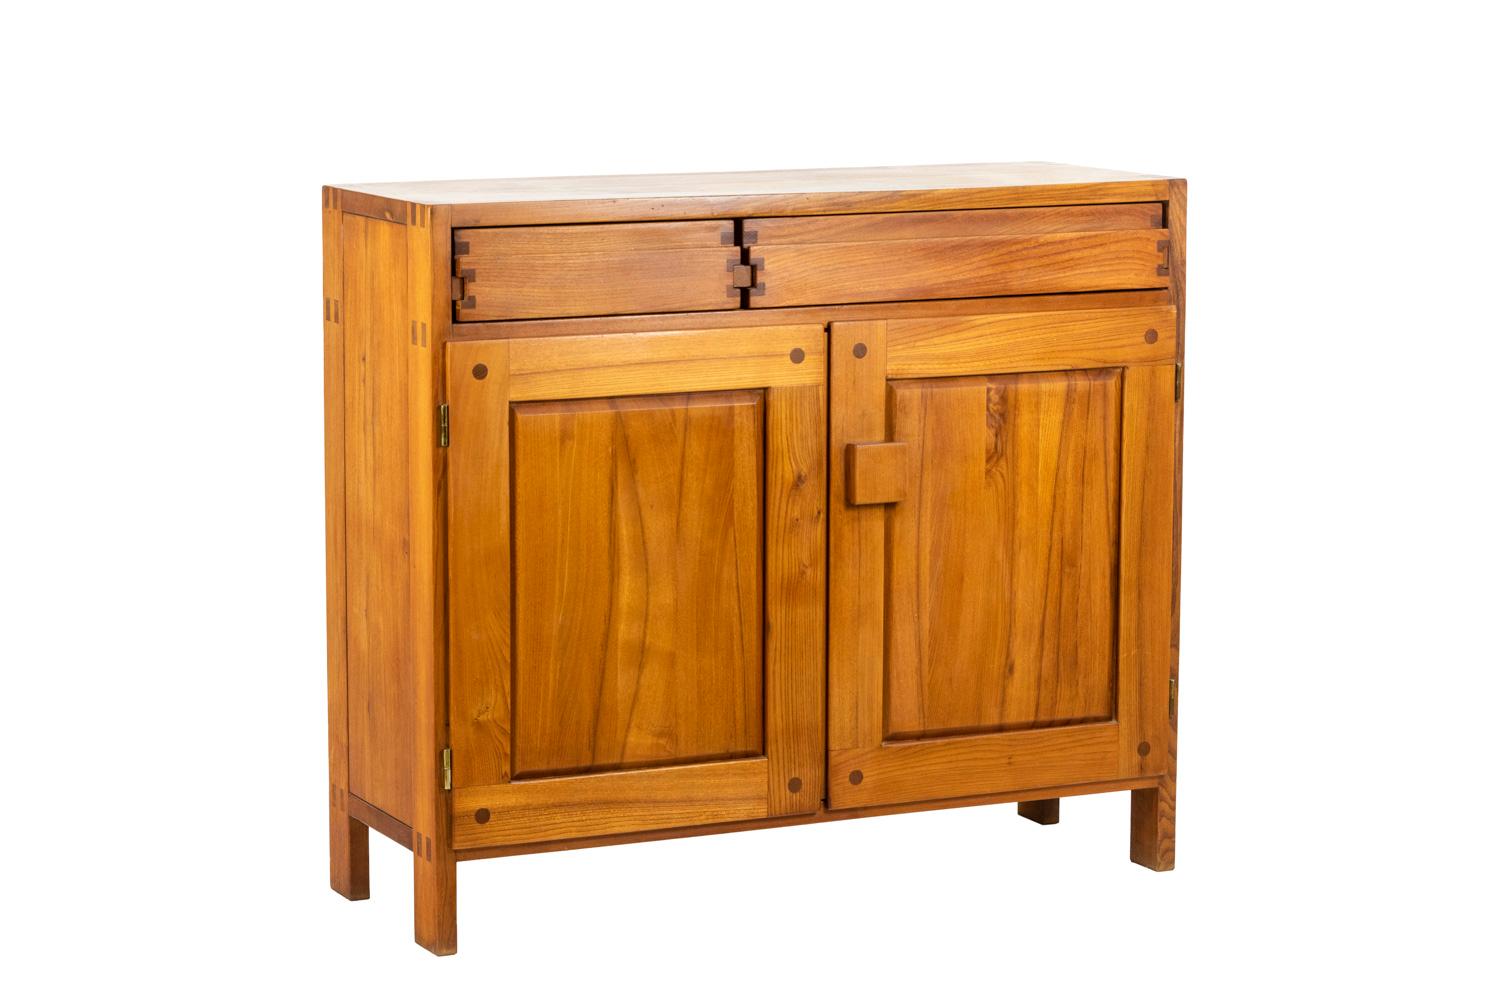 Pierre Chapo, signed.

Little rectangular buffet at support height in natural elm opening by two drawers and two door leaves.

French work realized in 1978.

Model R07.

Source : Hugues Magen (dir.), Pierre Chapo, A modern craftsman, New